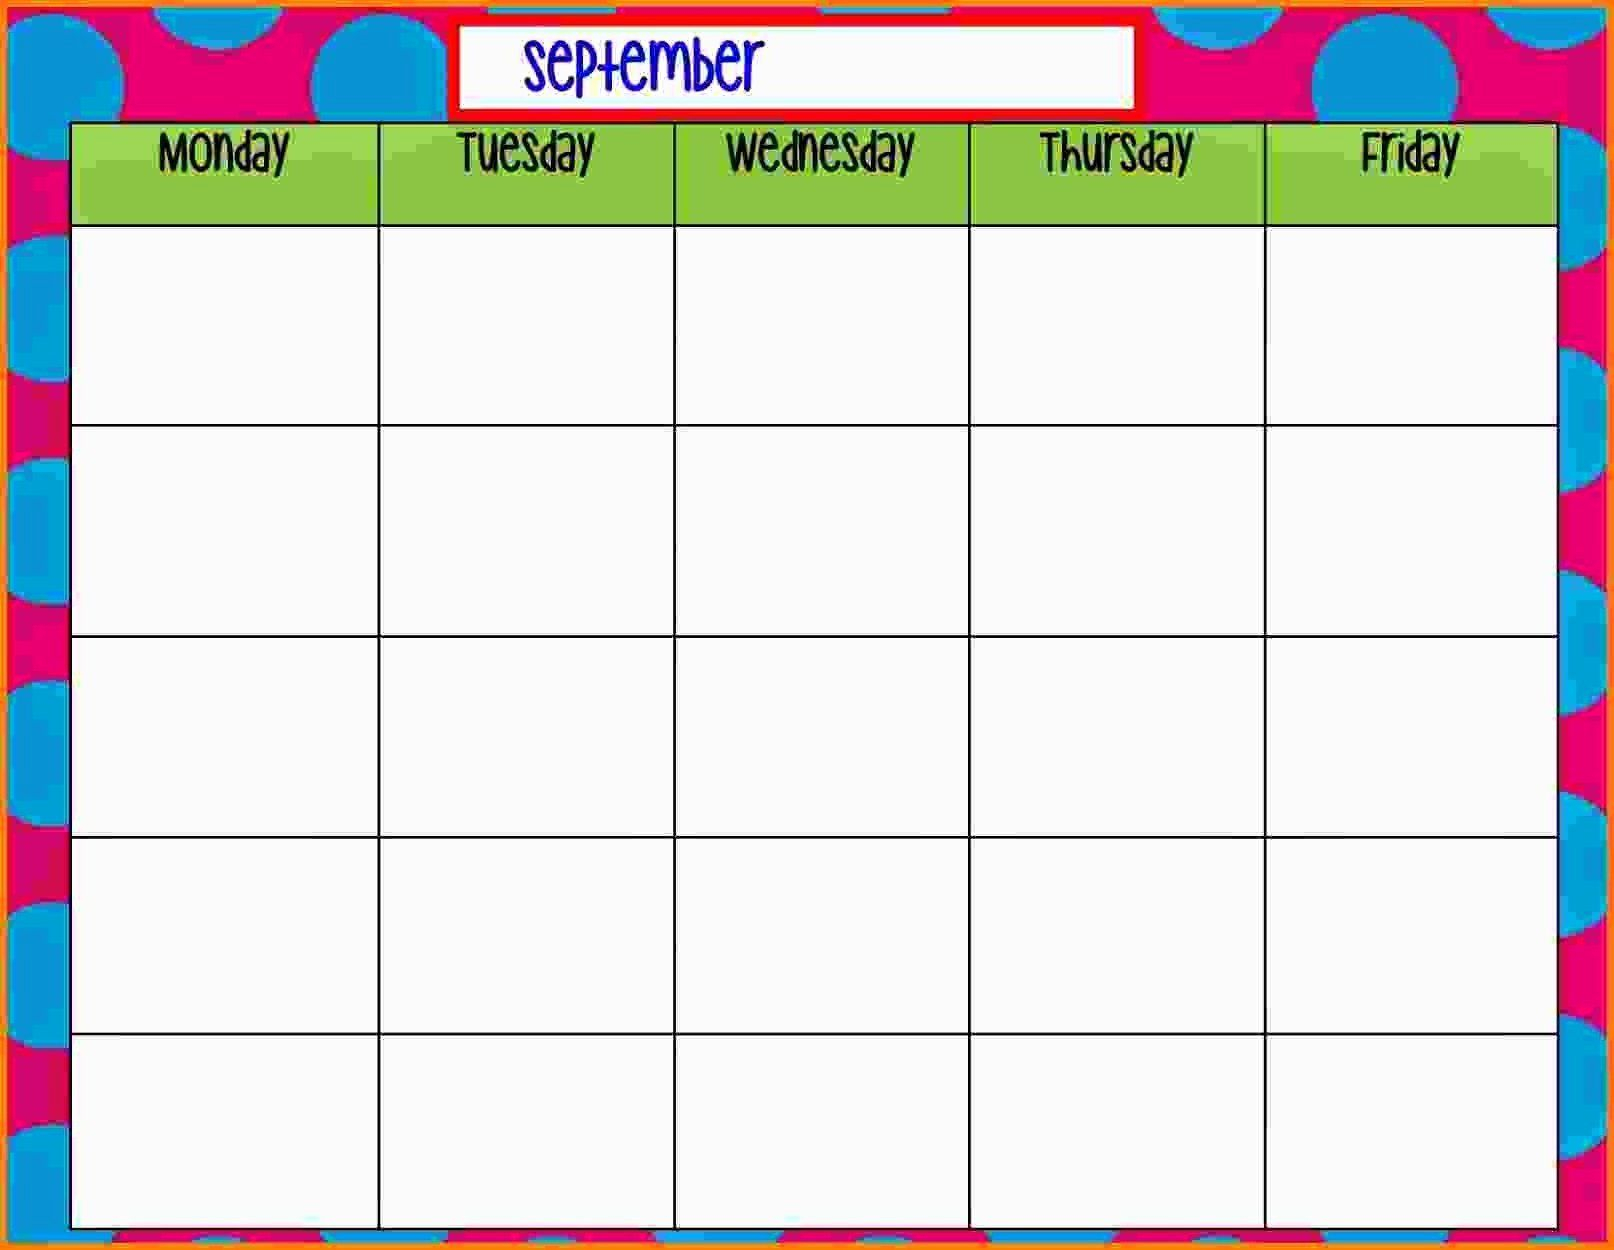 Monday To Friday Schedule Template Fresh Free Printable Blank Calendar pertaining to Monday To Friday Schedule Chart